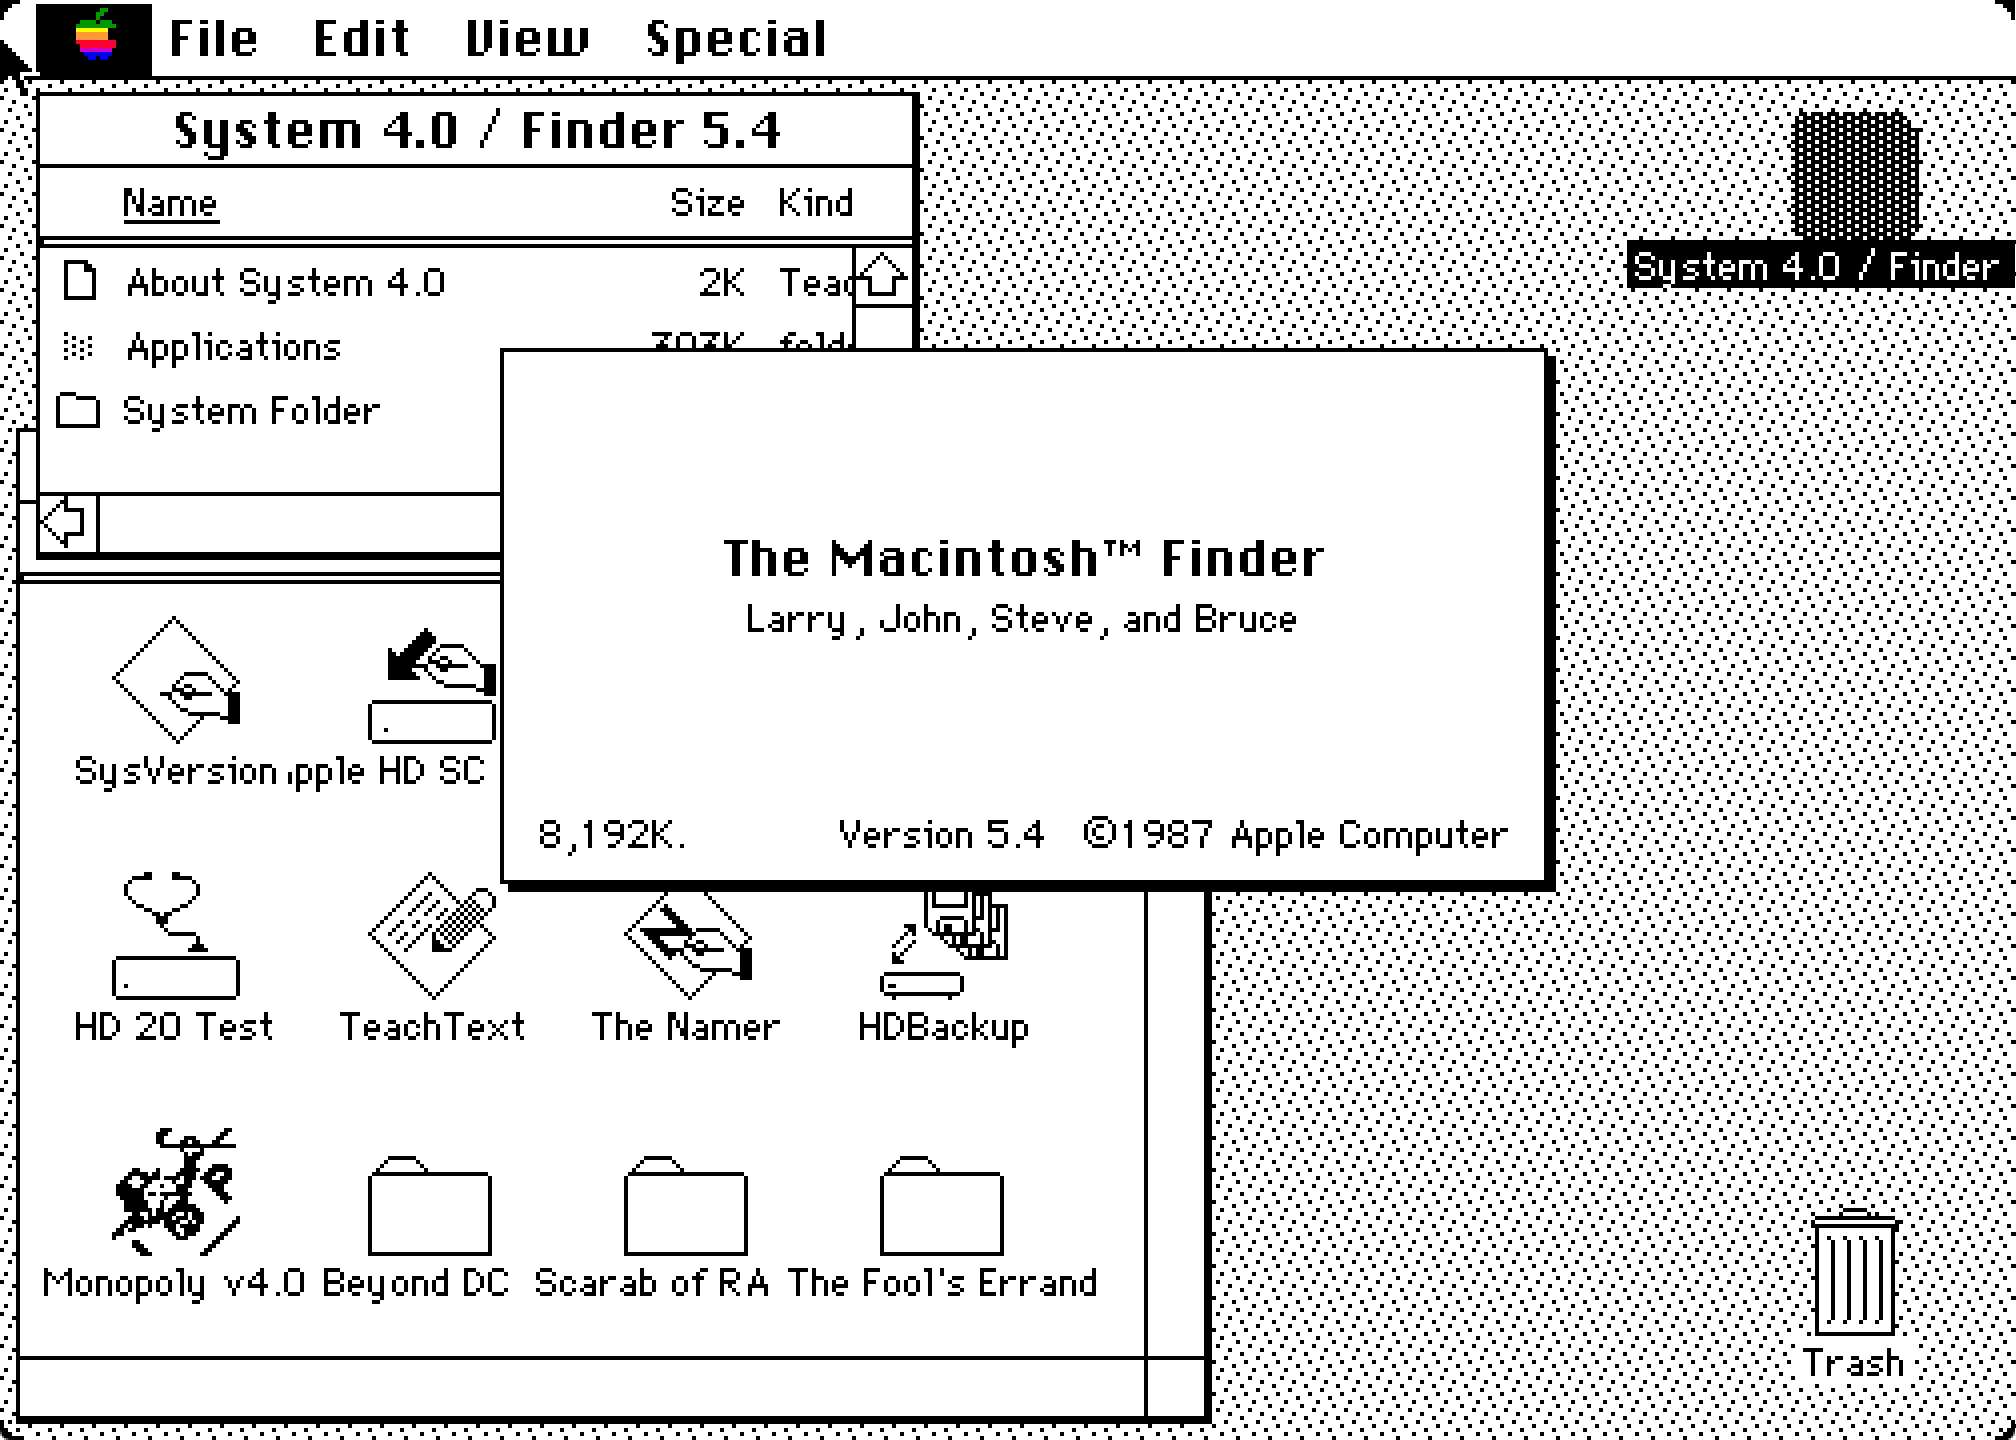 The Employee (itch) Mac OS